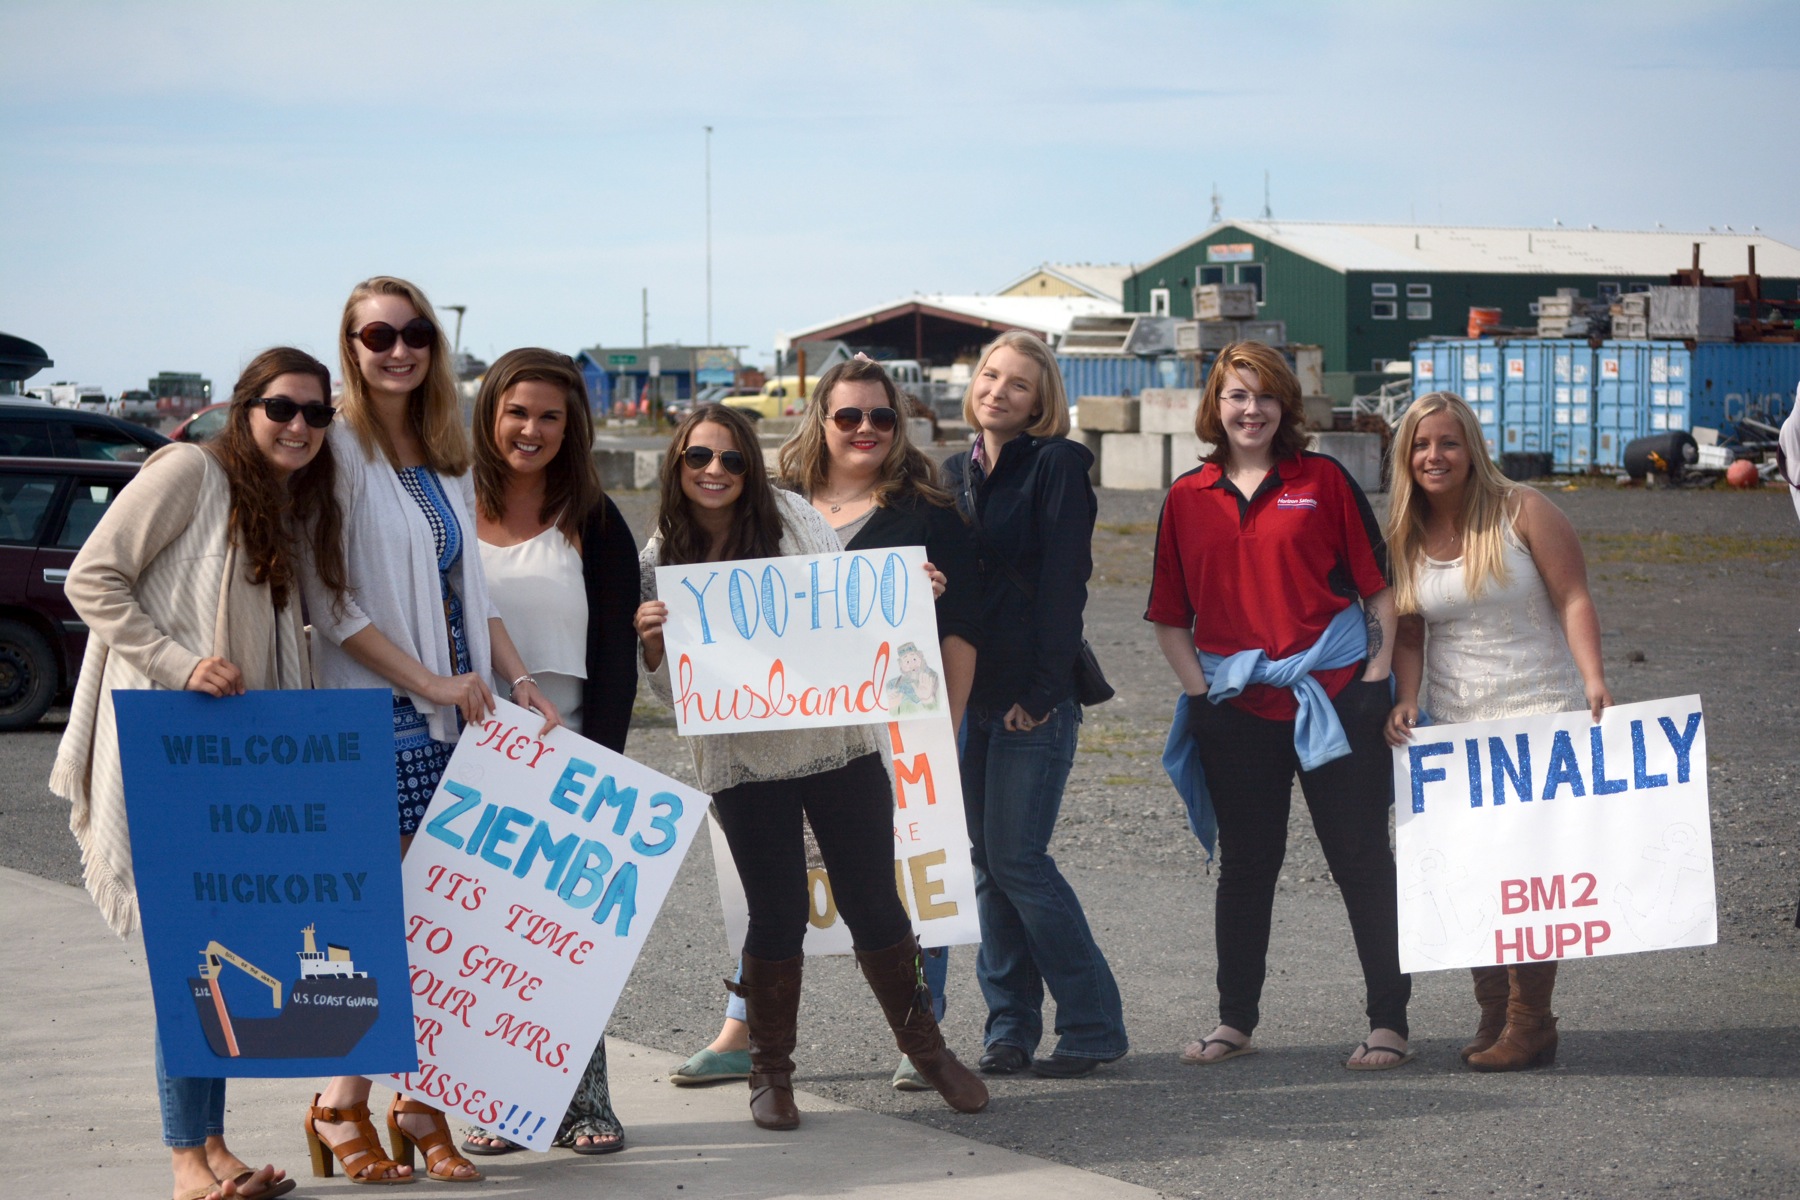 A group of U.S. Coast Guard wives wait at the Pioneer Dock on Thursday to greet their husbands after a four-month deployment on the U.S. Coast Guard Cutter Hickory. From left to right are Melissa Parker, Nicole Ziemba, Kaitlyn Burns, Emily Davis, Lyndsay McGarran, Carly Robinson, Madison Russell and Laura Hupp.-Photo by Michael Armstrong, Homer News